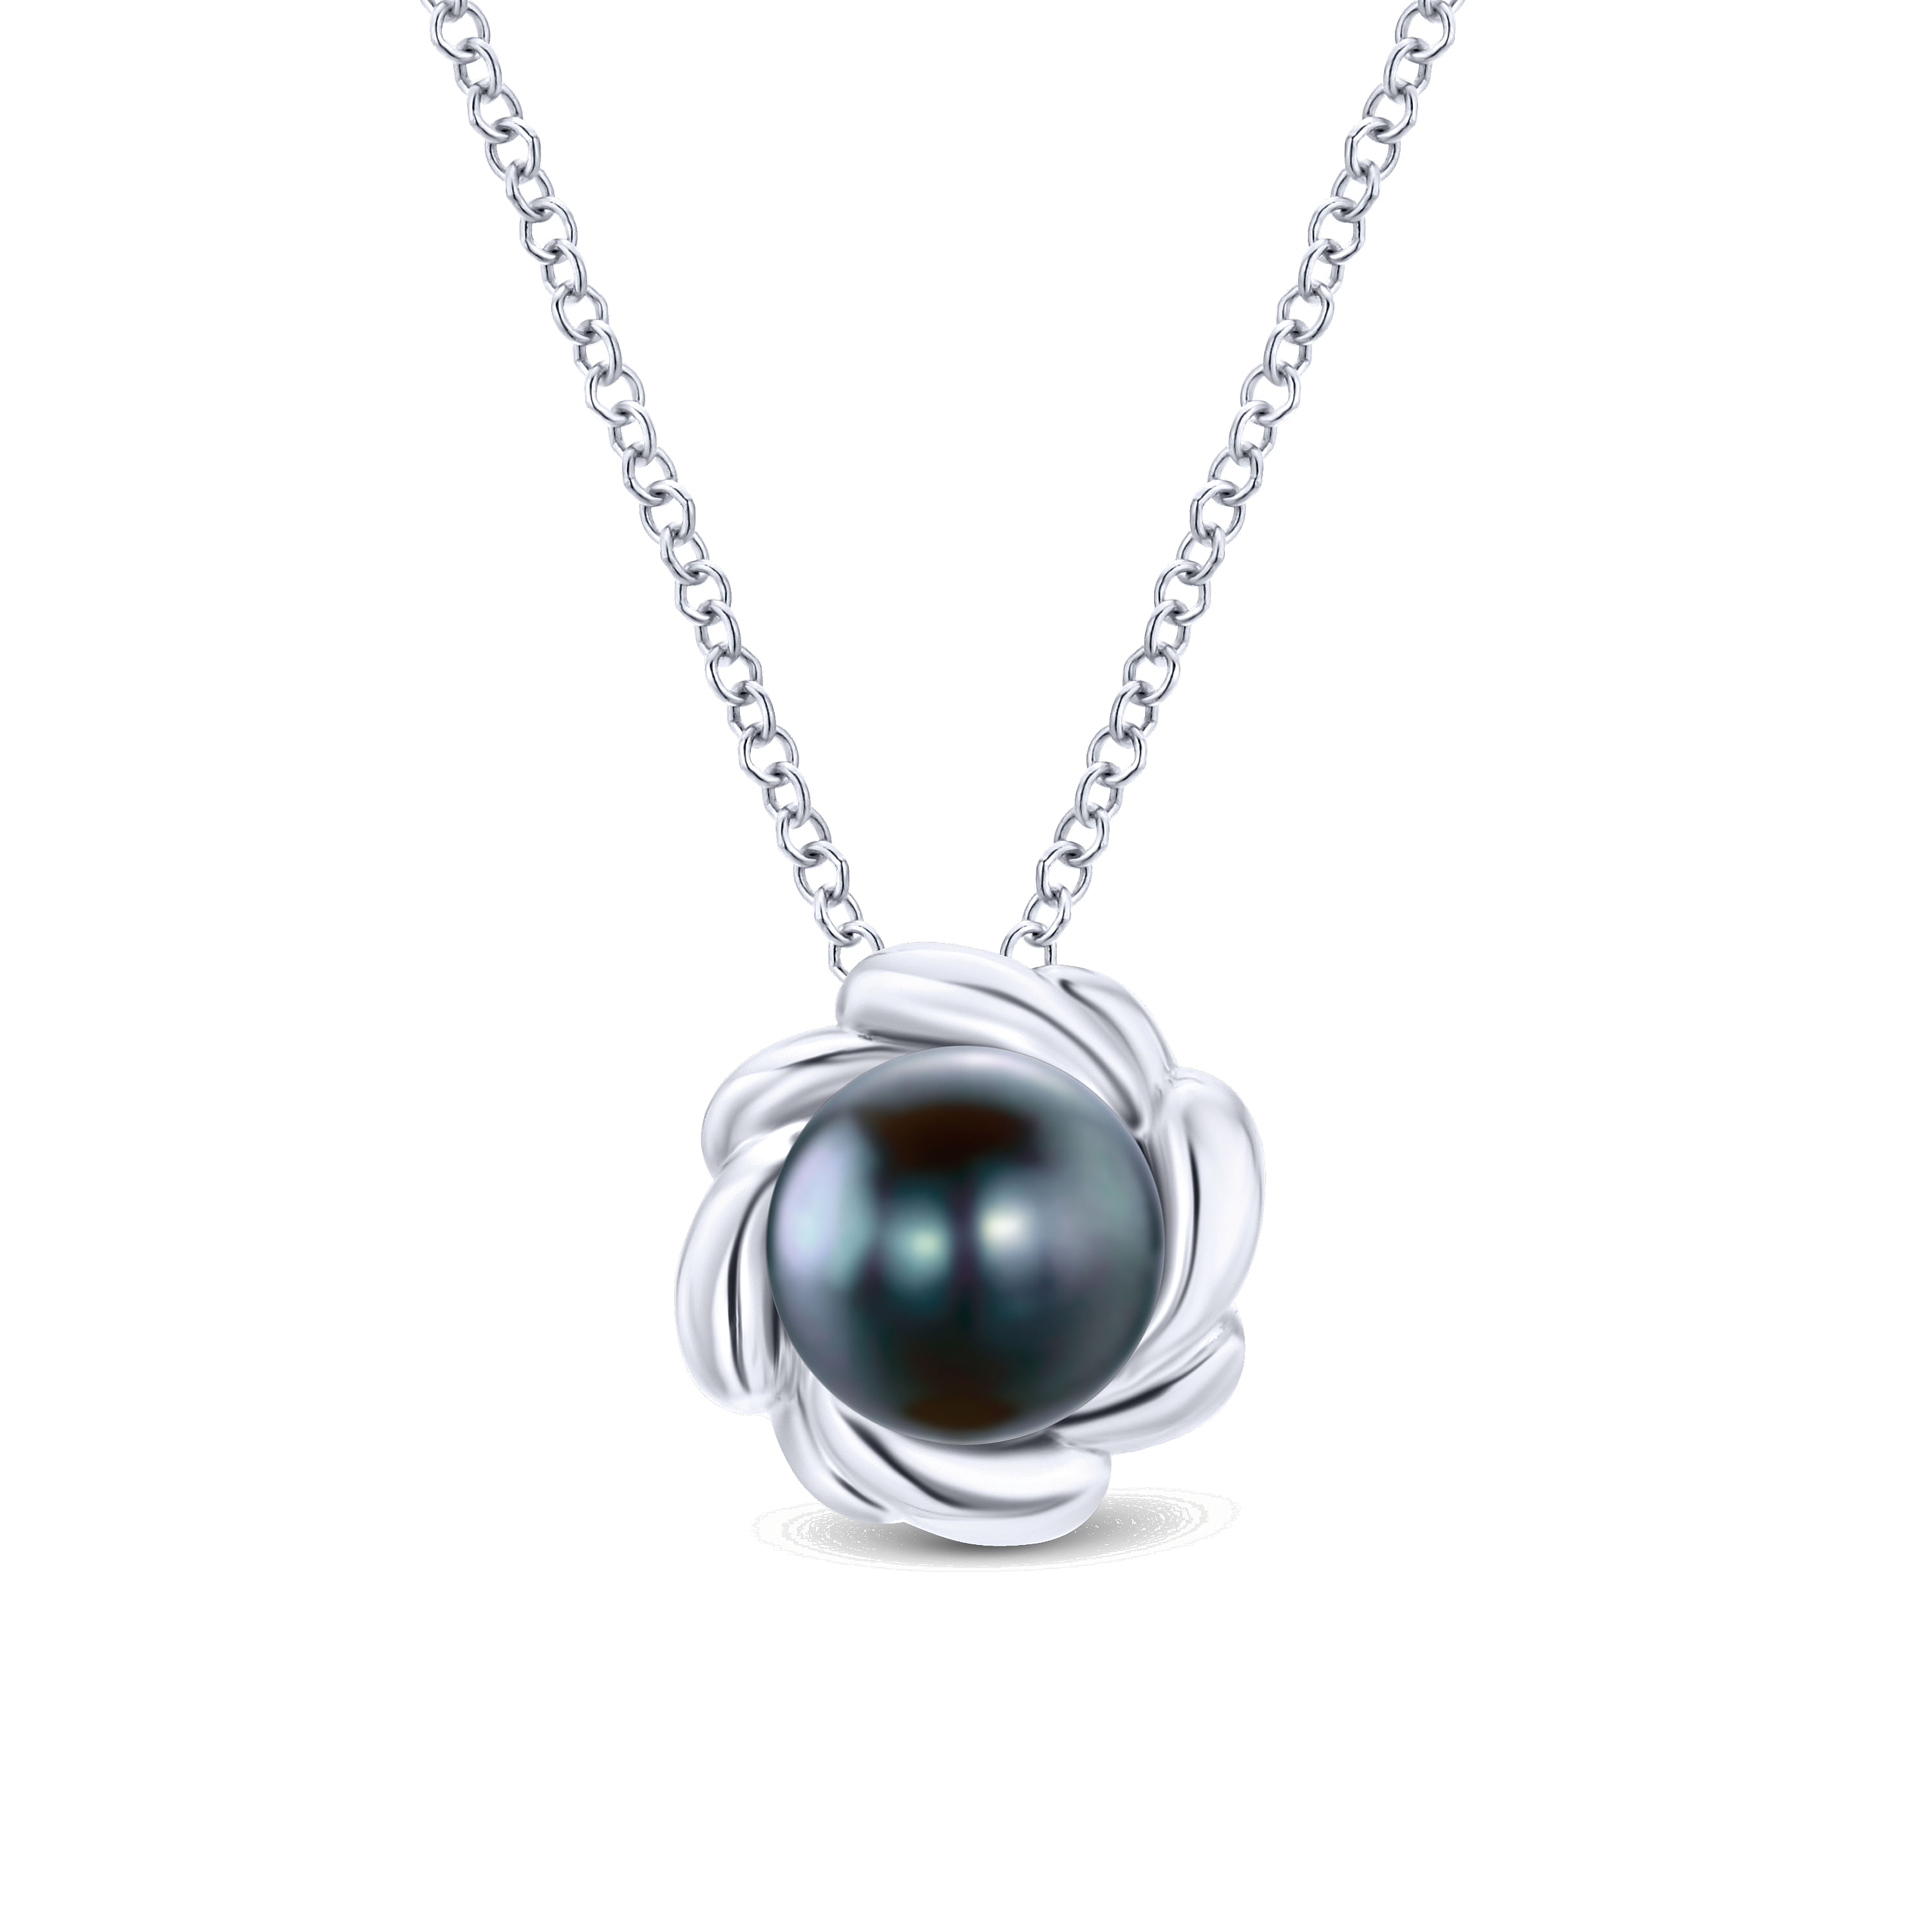 18 inch 925 Sterling Silver Swirling Black Pearl Pendant Necklace